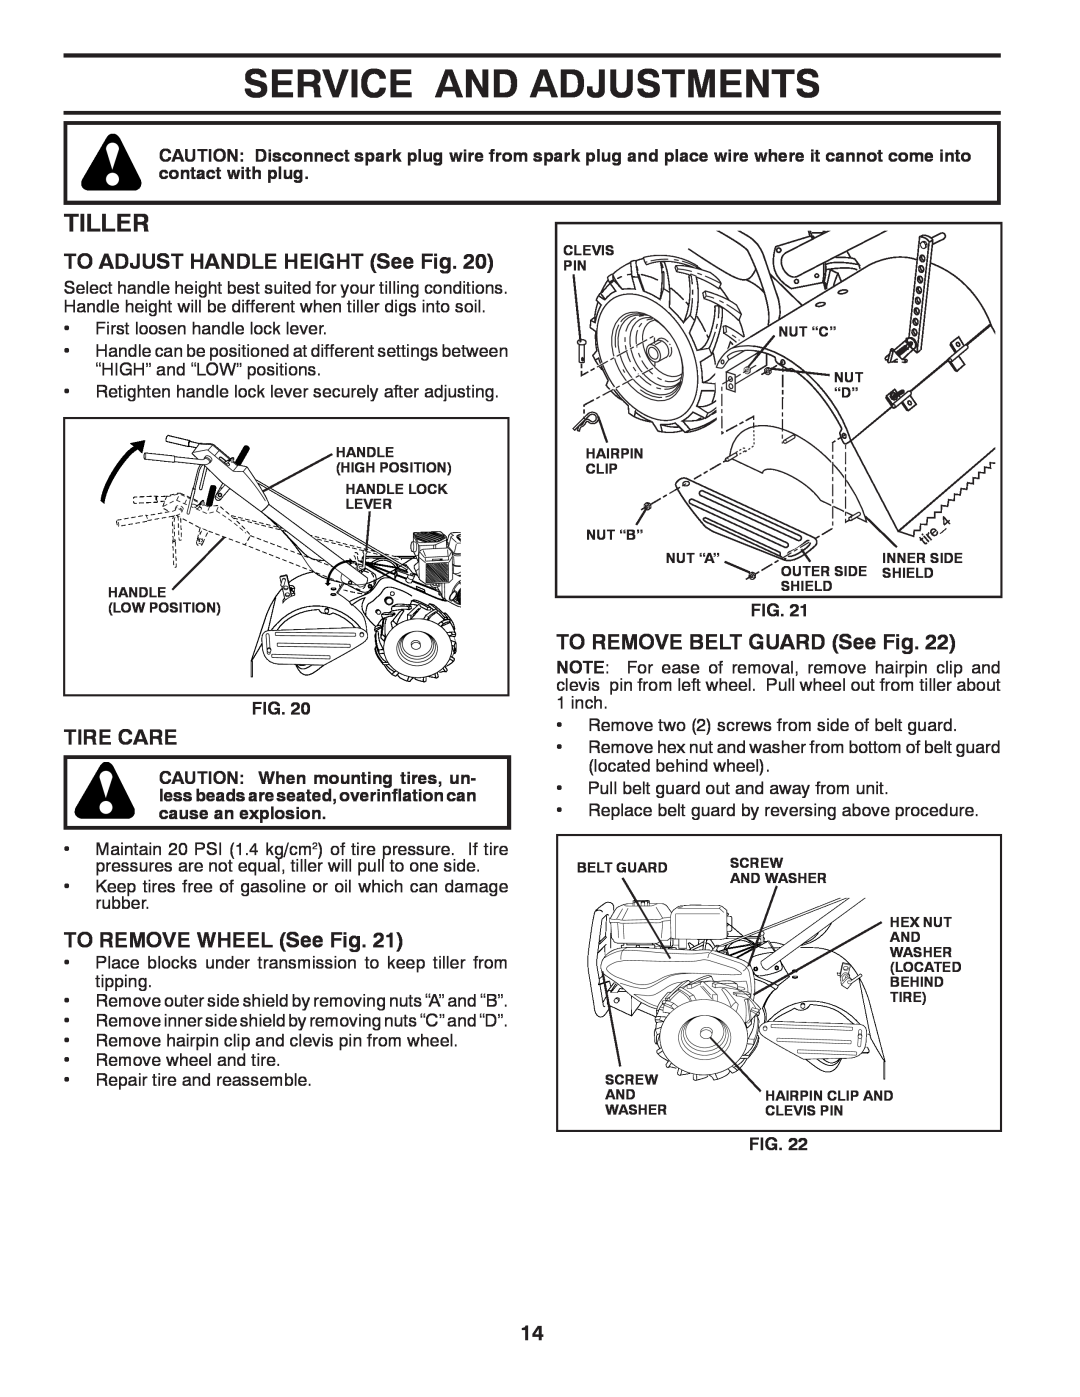 Poulan 418121 manual Service And Adjustments, Tiller, TO ADJUST HANDLE HEIGHT See Fig, Tire Care, TO REMOVE WHEEL See Fig 